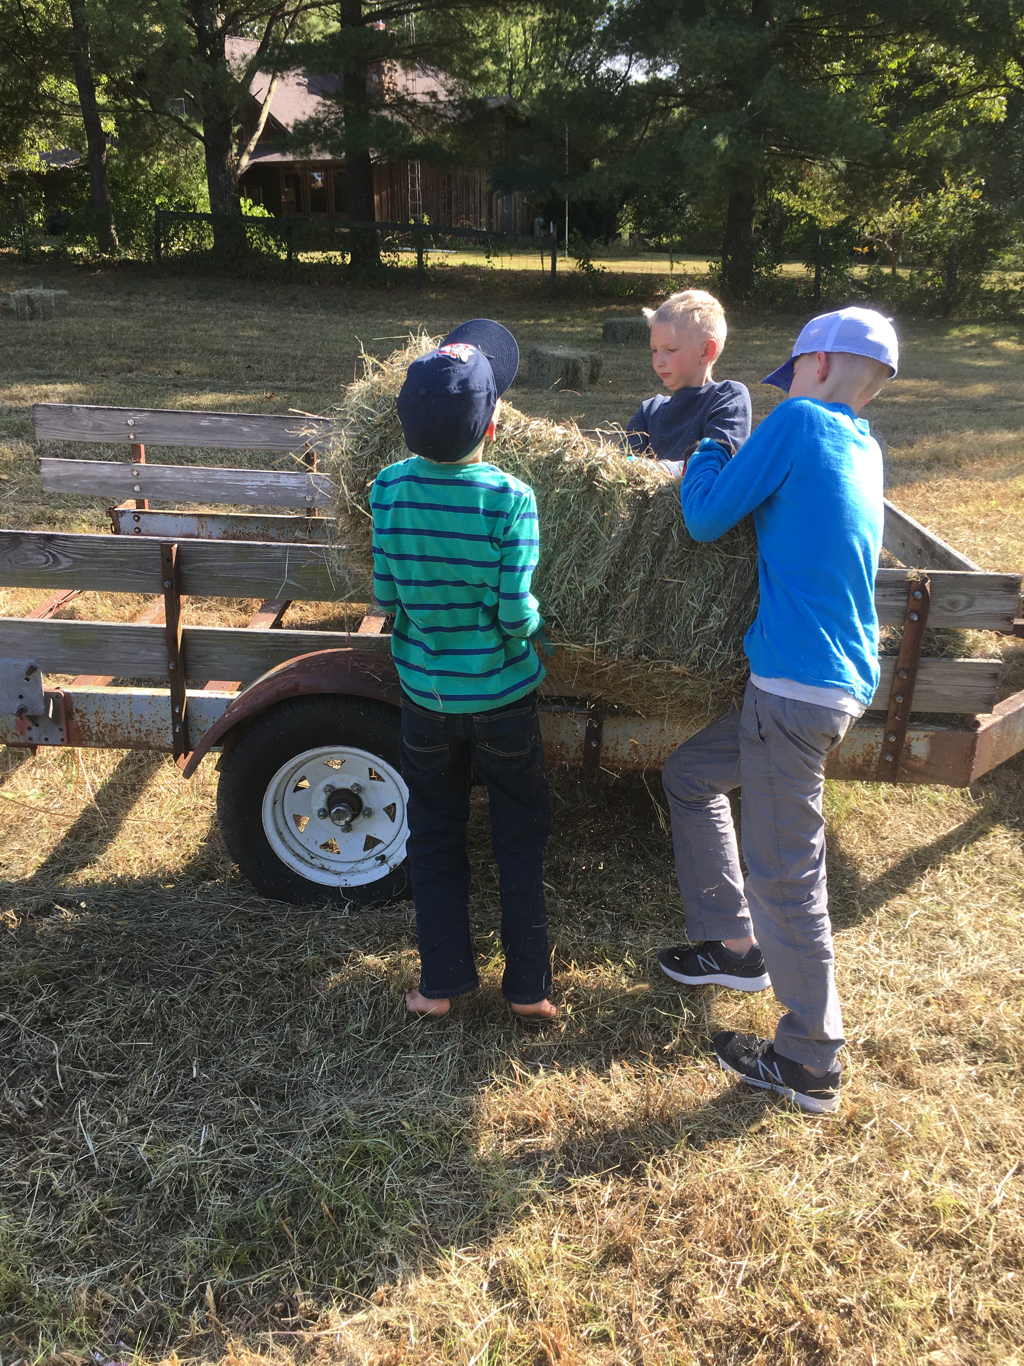 The boys working together to load hay in the wagon.